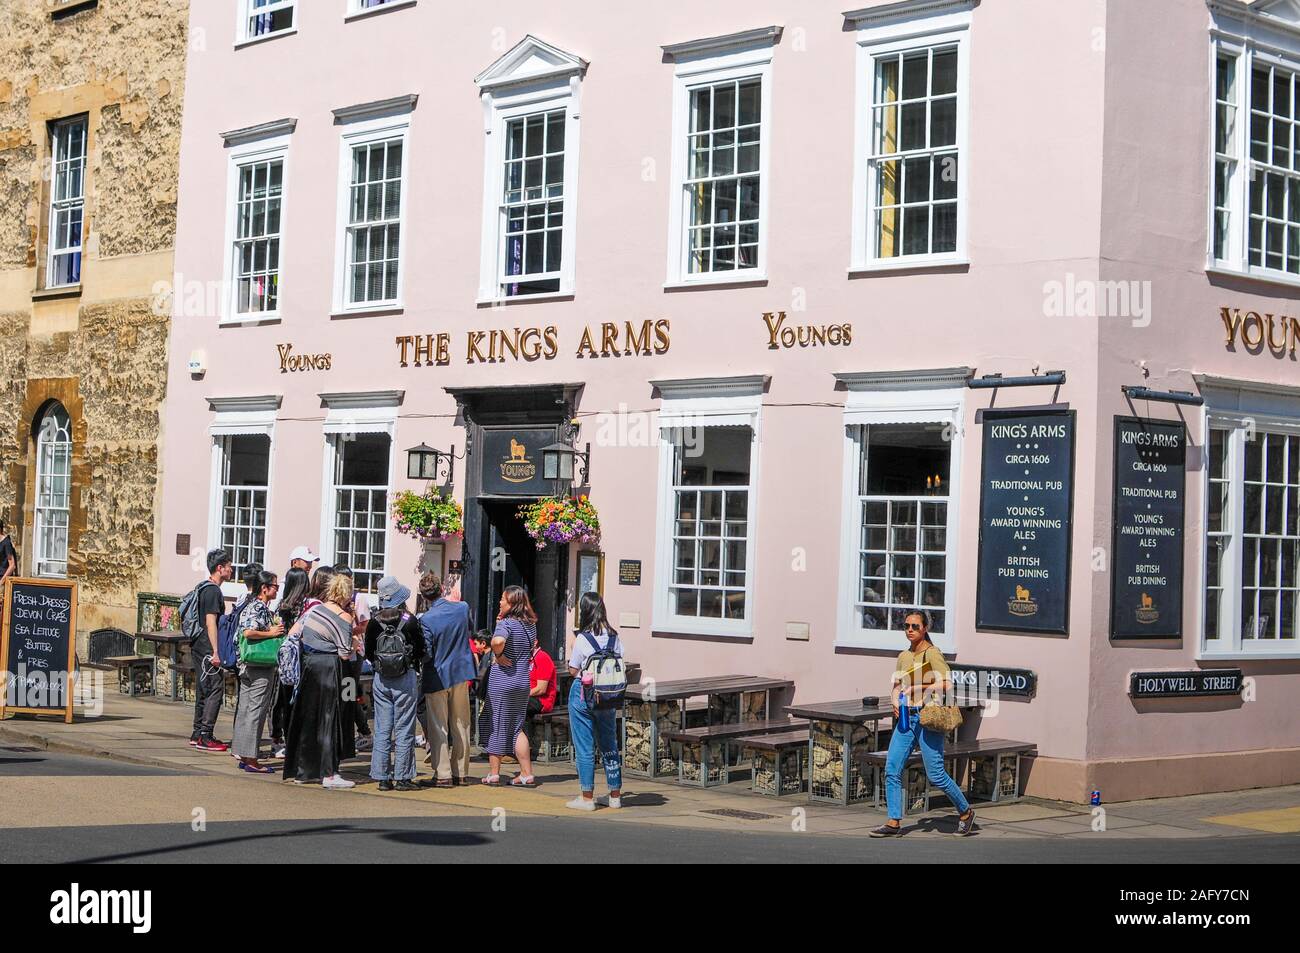 King's Arms, Oxford - Wikipedia